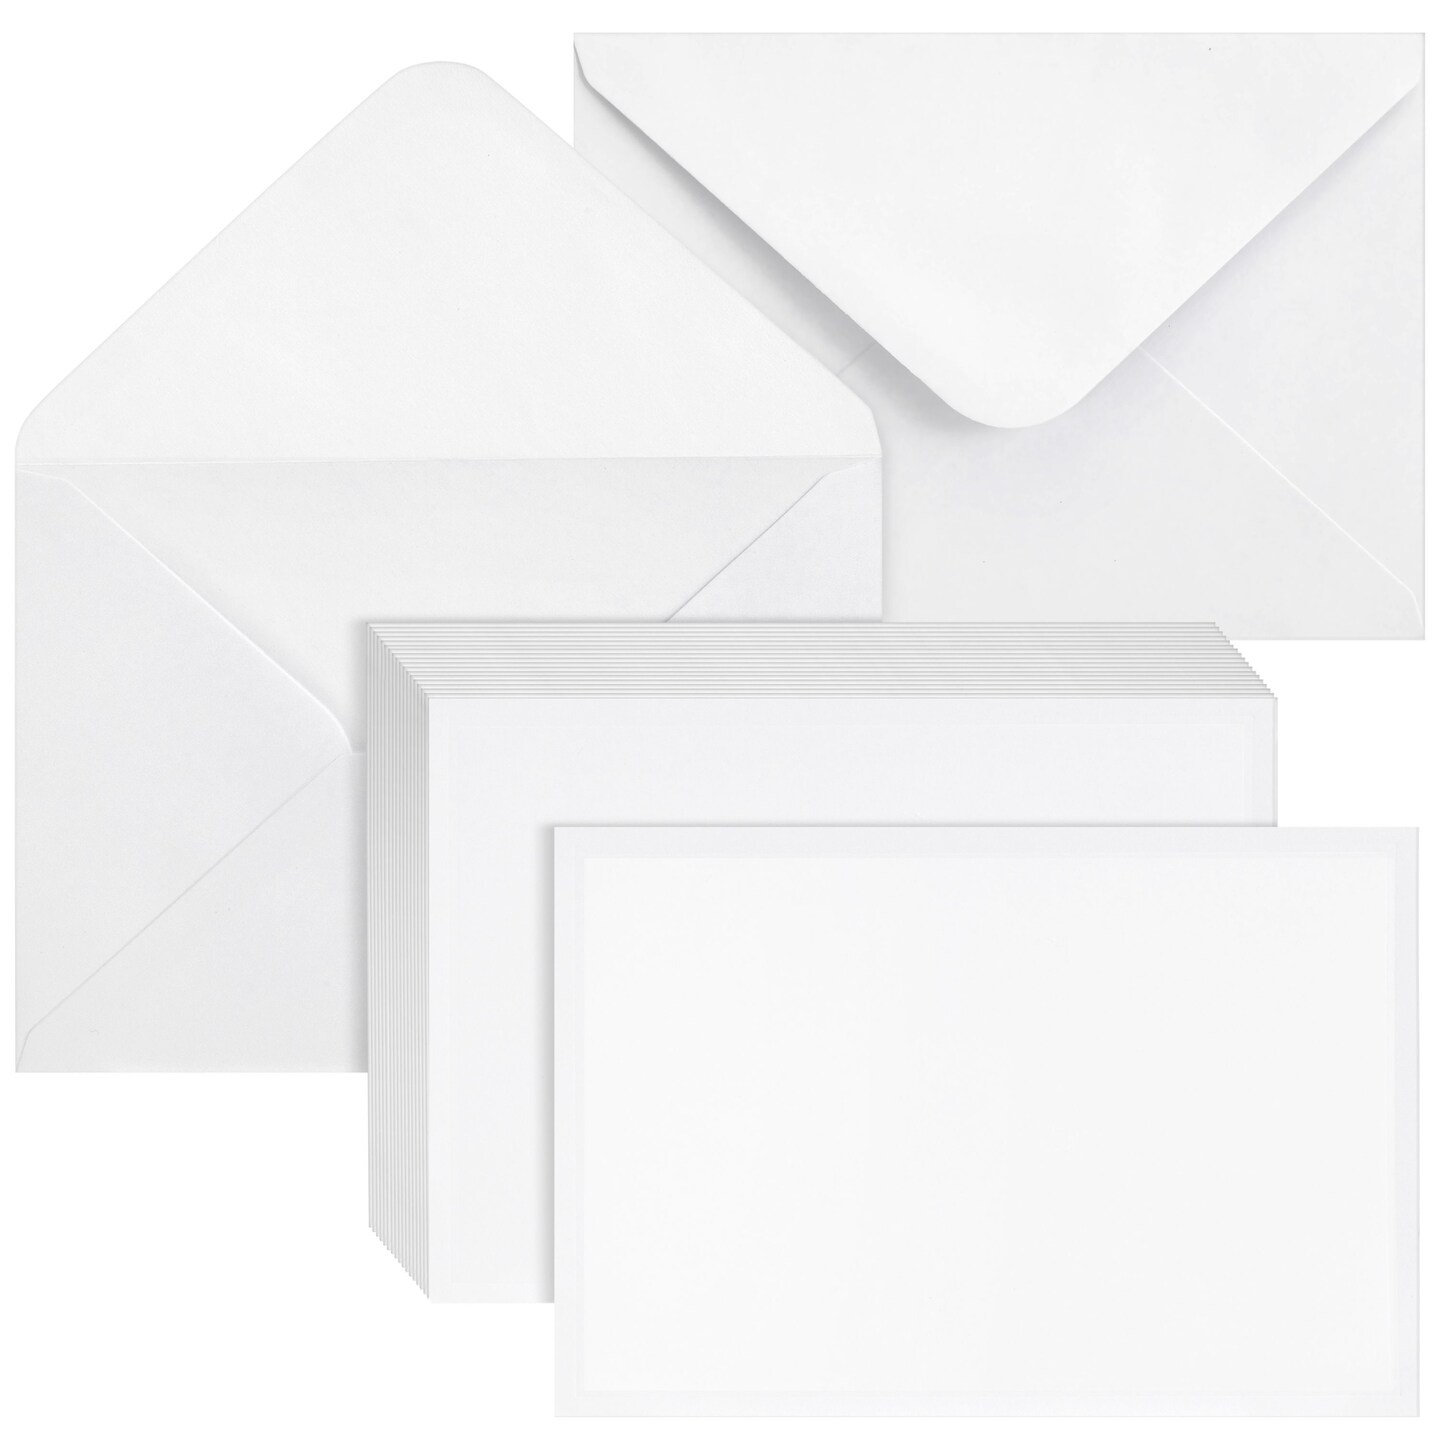  100 Pack Pre-Folded Vellum Jackets for 5x7 Invitations  Transparent Invitation Kraft Vellum Wedding Invitations Wraps Cover for  Baby Shower Birthday Party Invitations Postcards Photos Scrapbook : Arts,  Crafts & Sewing